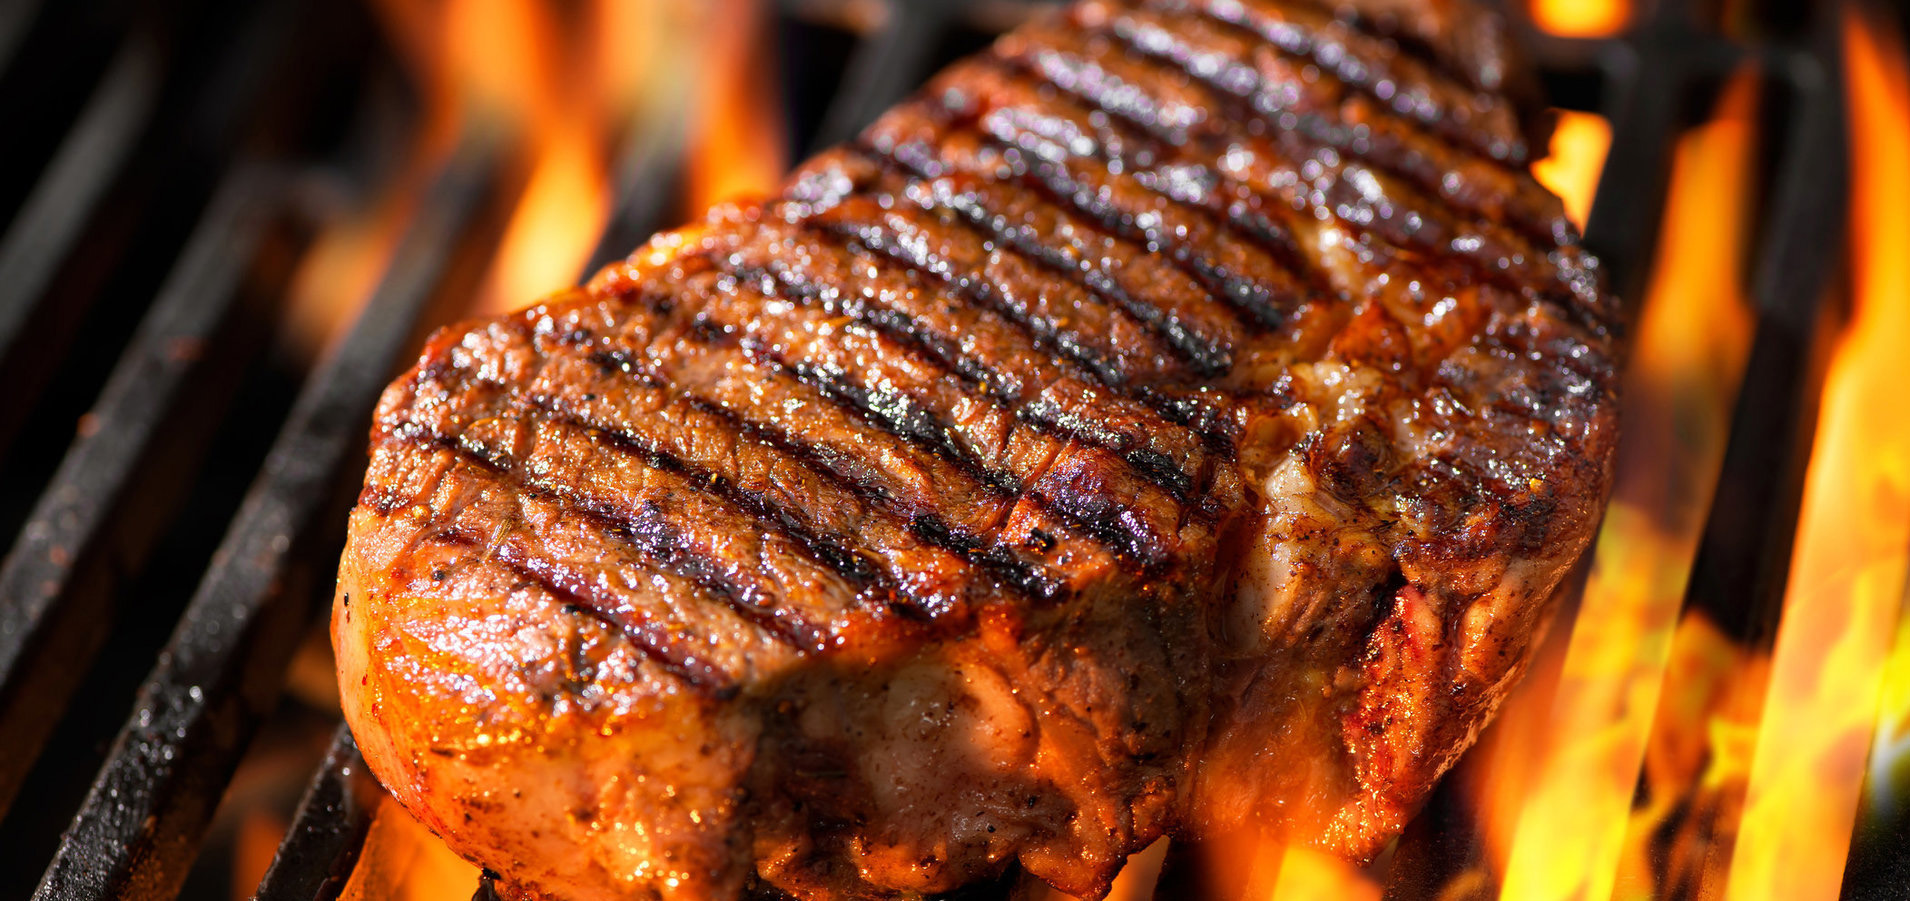 Best blogs to follow for grilling goodness